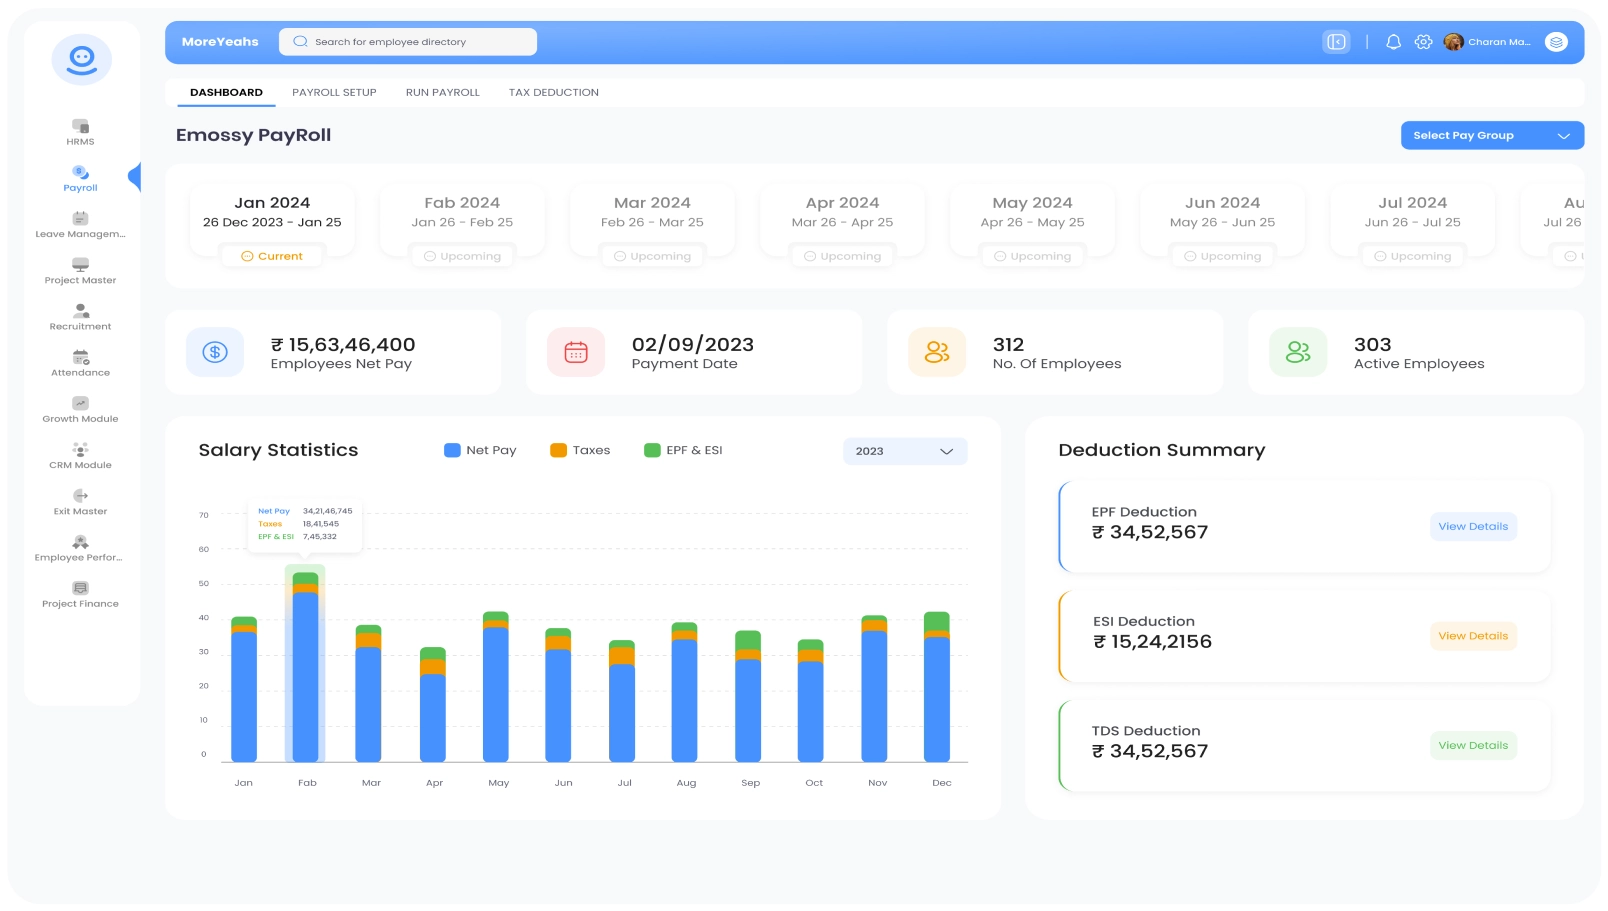 Emossy payroll deshboard showing the salary statistics and deduction summary